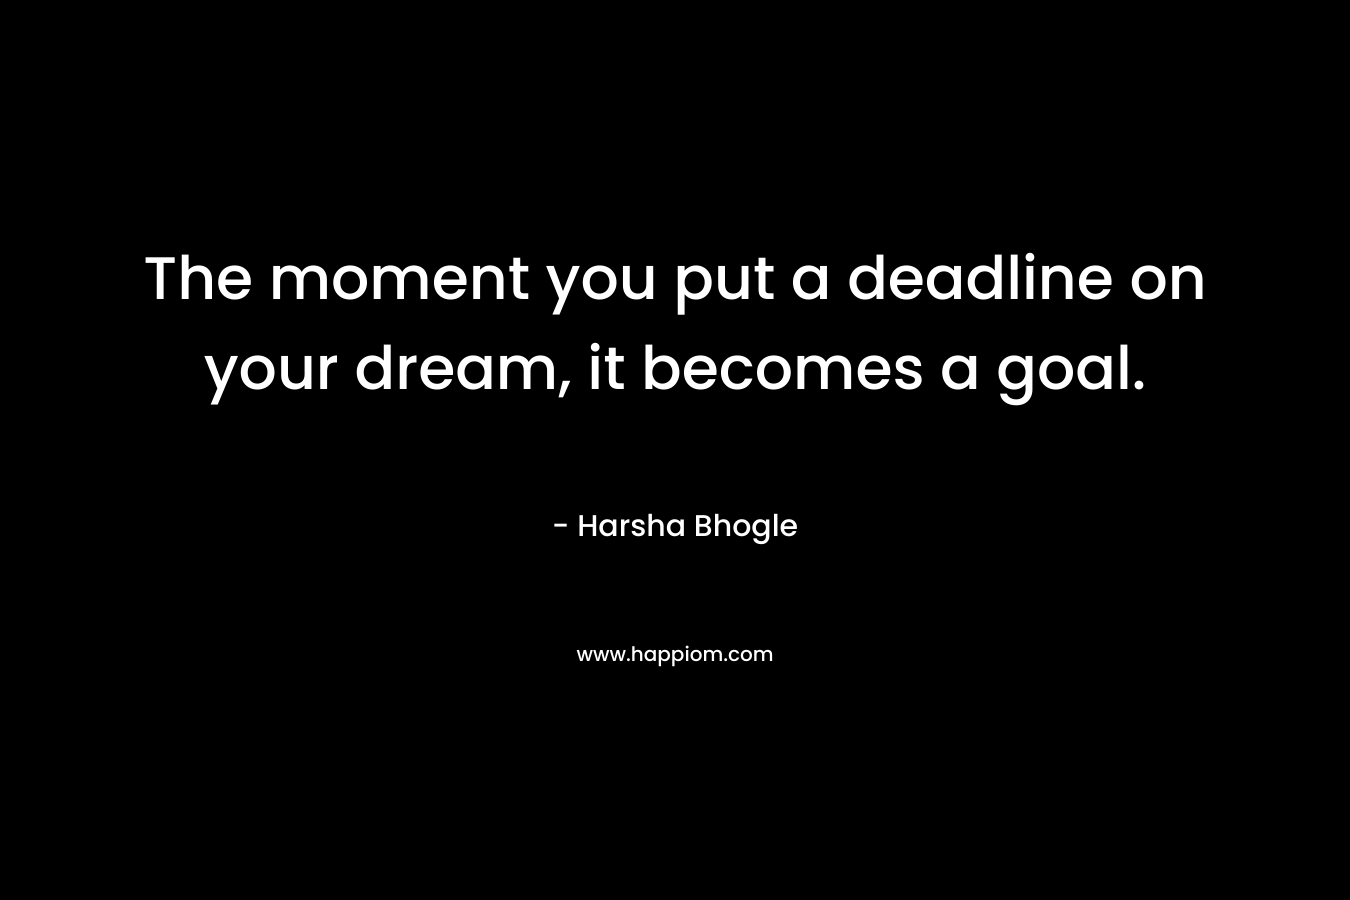 The moment you put a deadline on your dream, it becomes a goal.